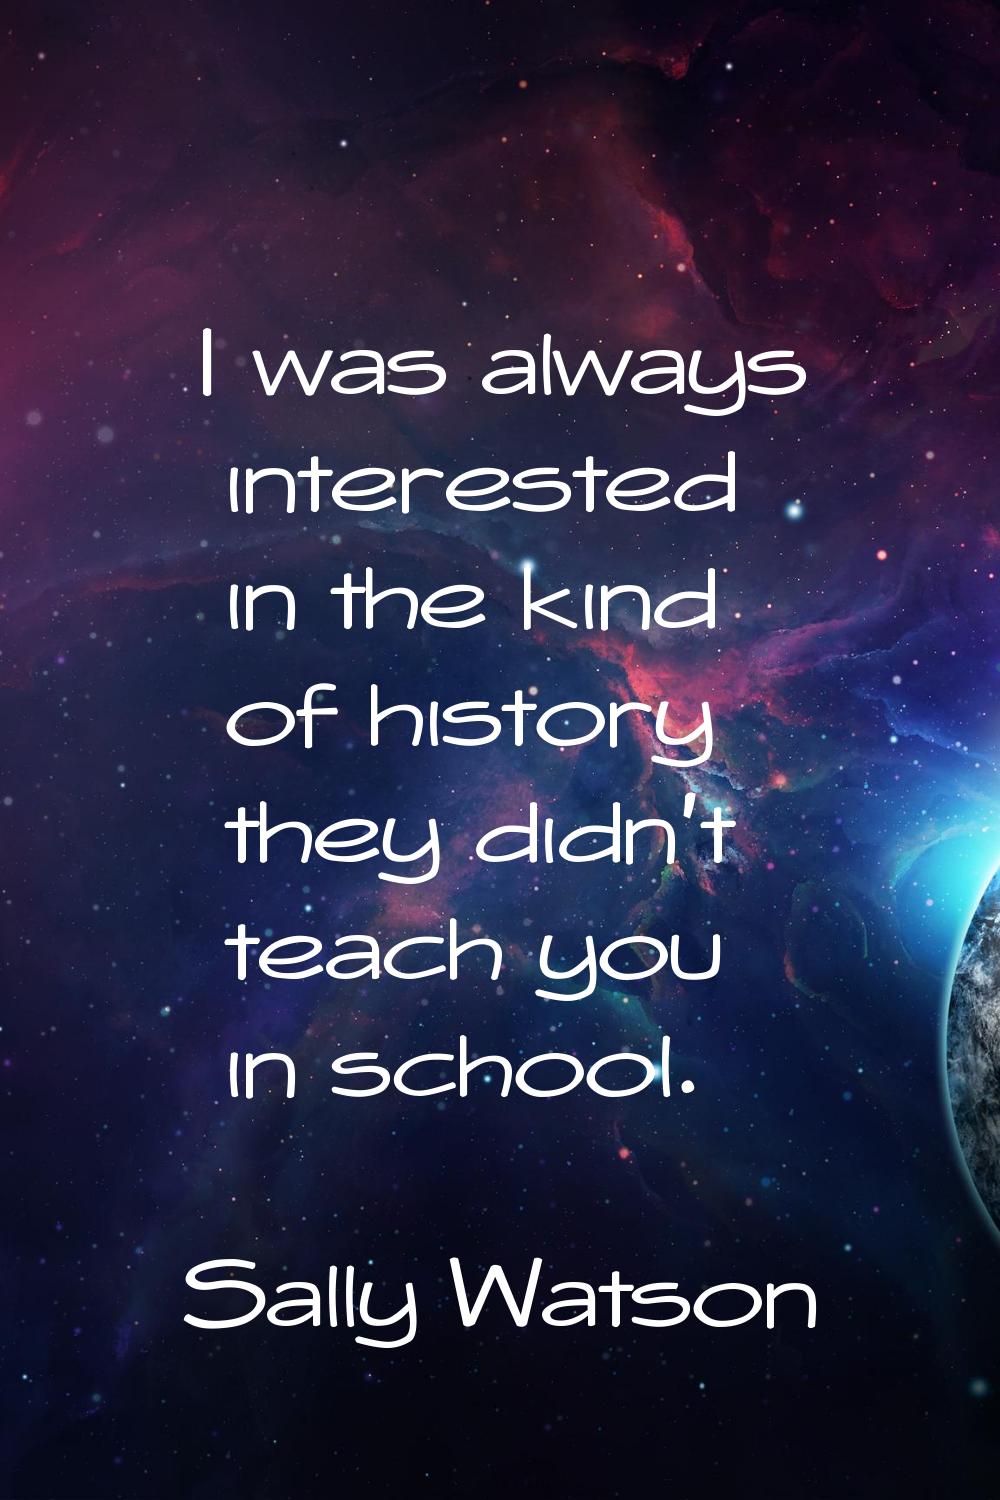 I was always interested in the kind of history they didn't teach you in school.